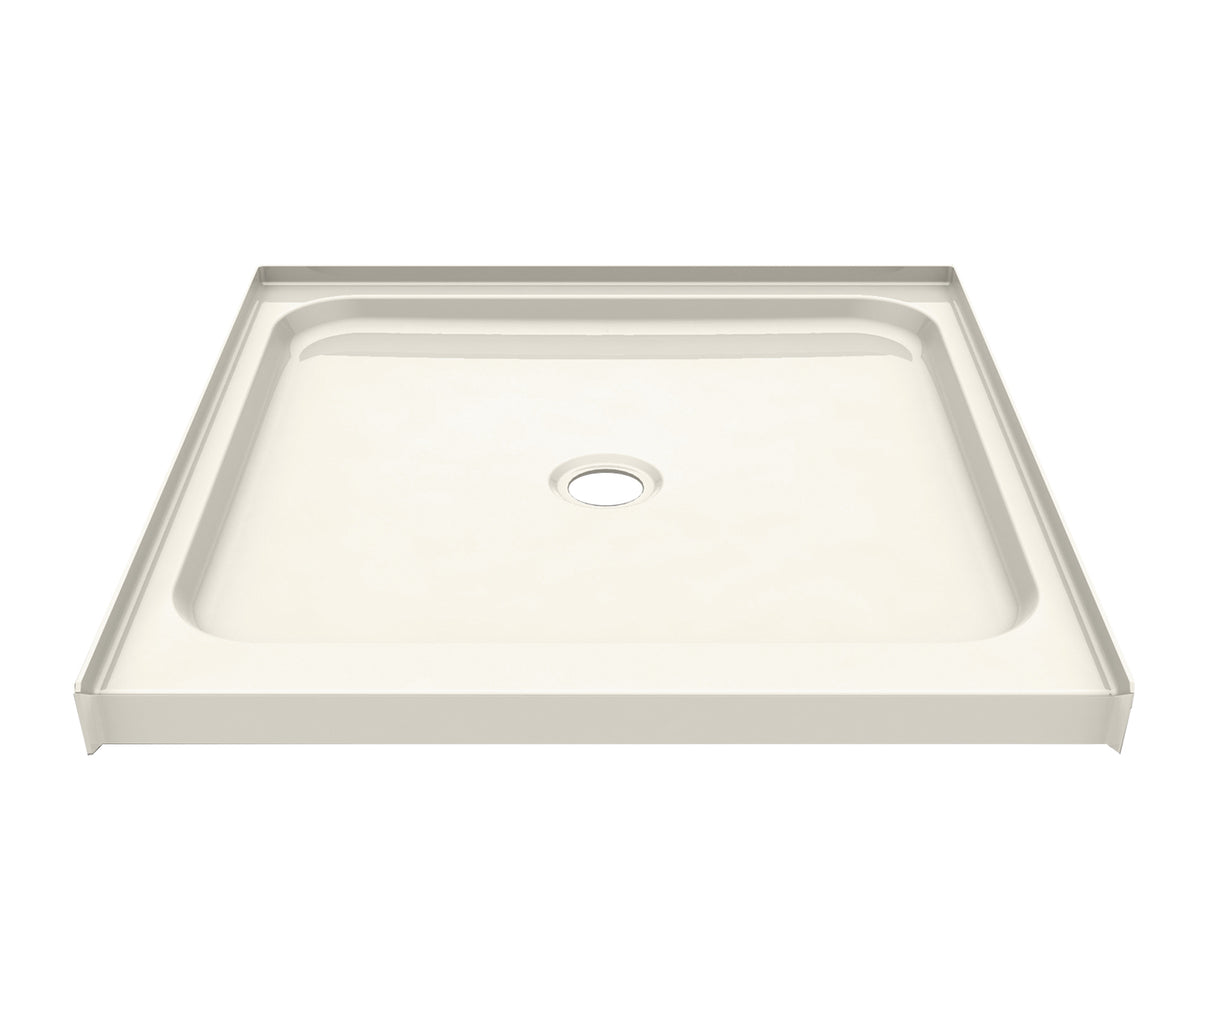 Aker SPL 3232 AcrylX Alcove Center Drain Shower Base in Biscuit